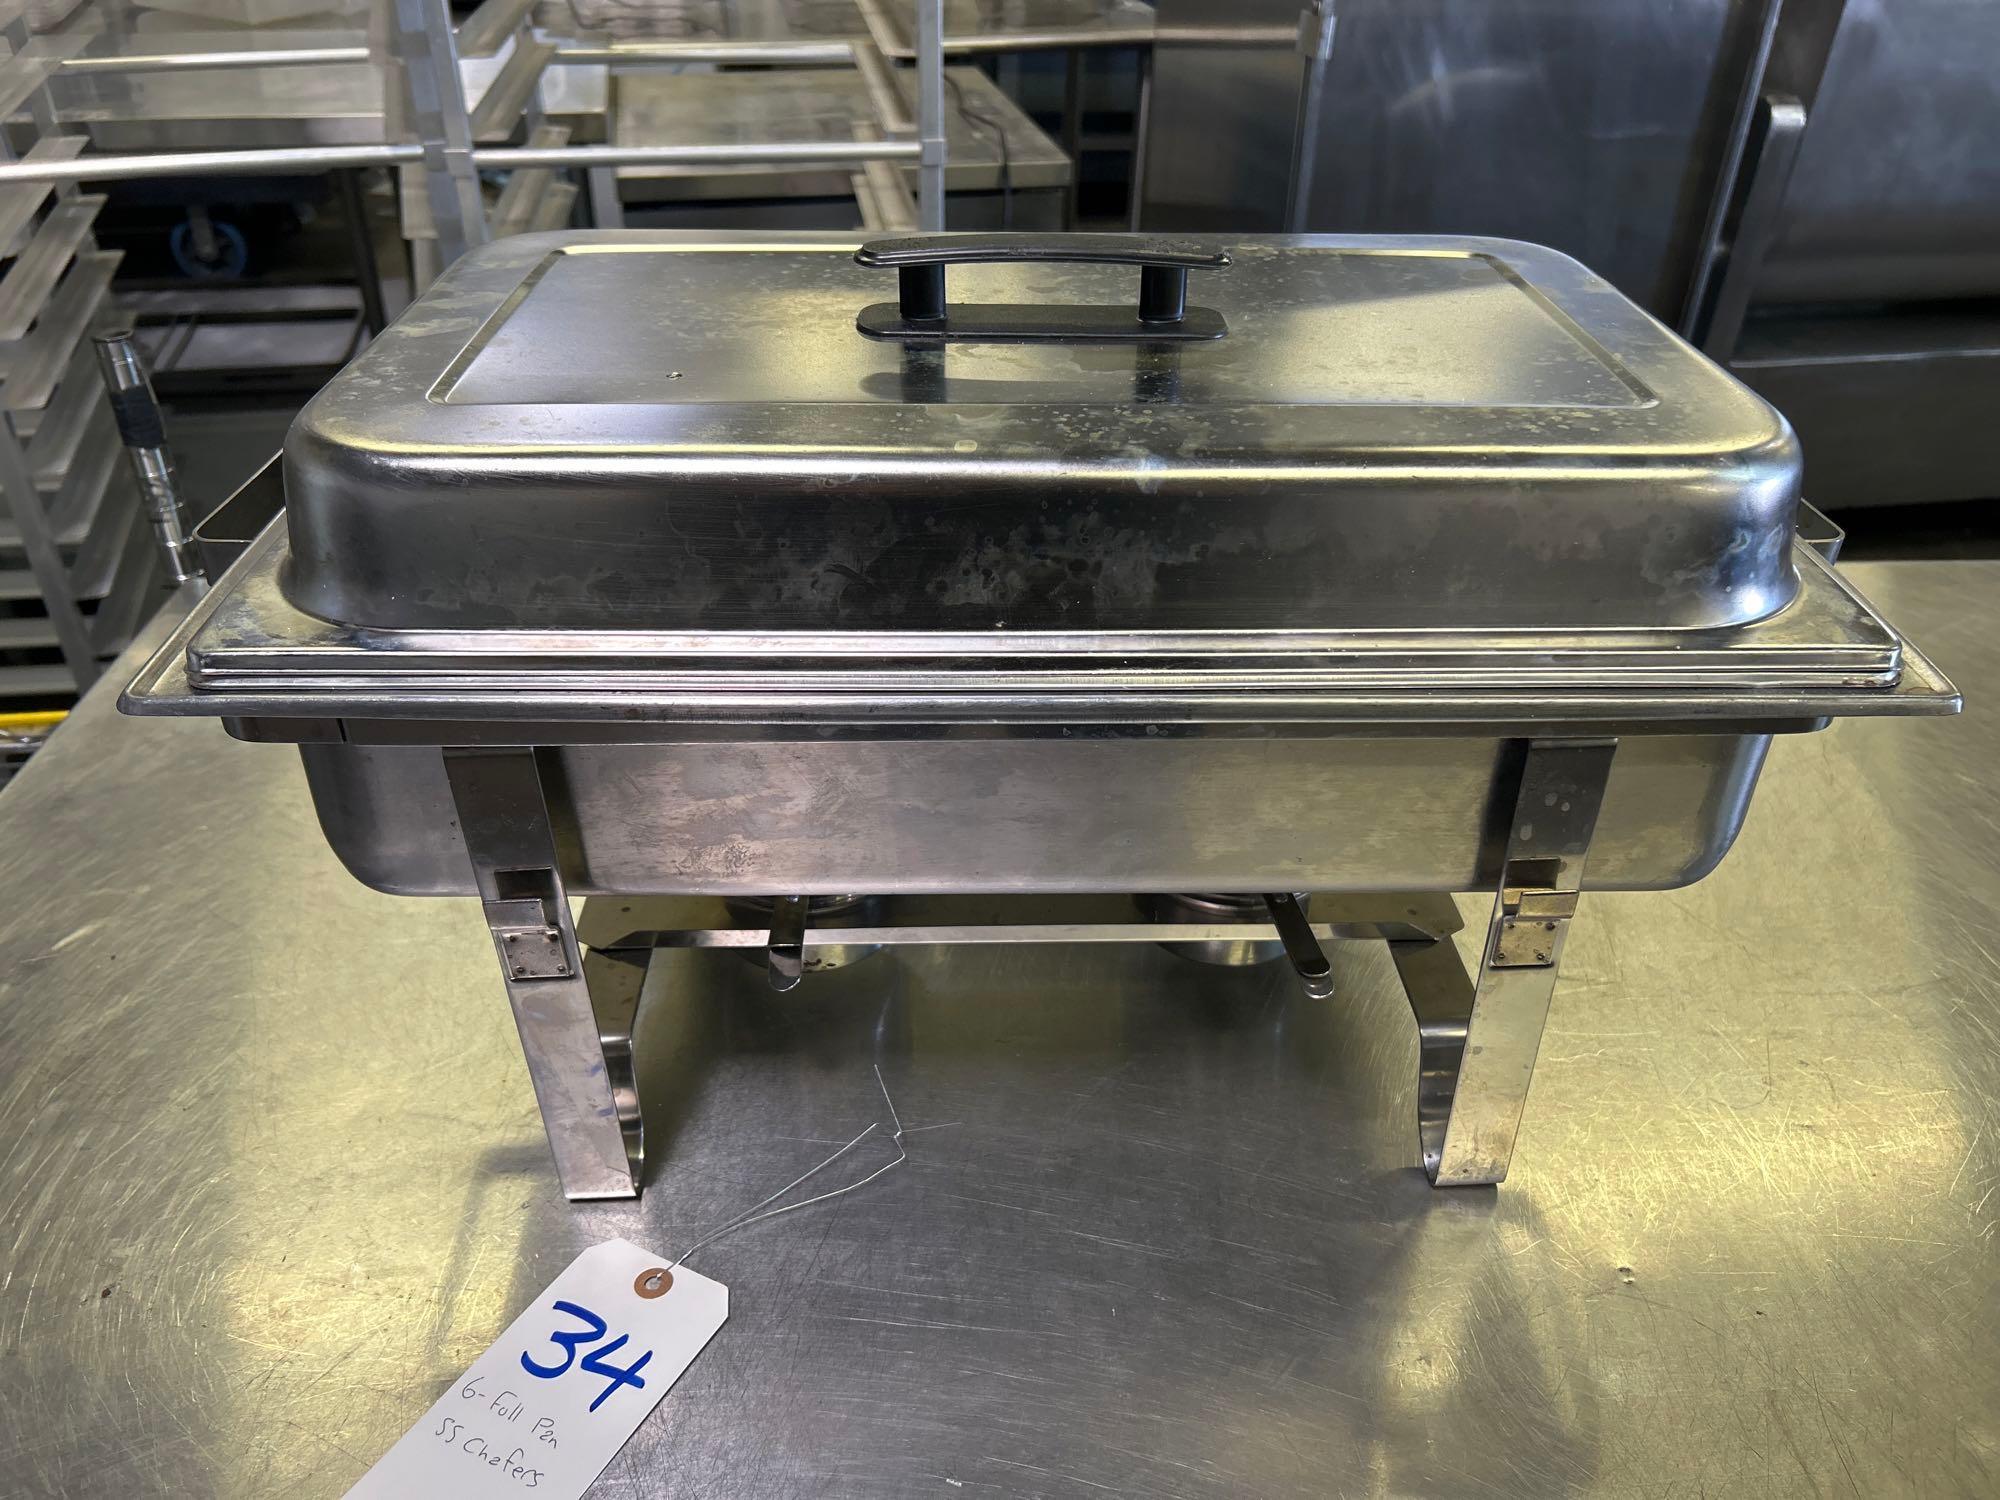 Full Size Stainless Steel Chafers